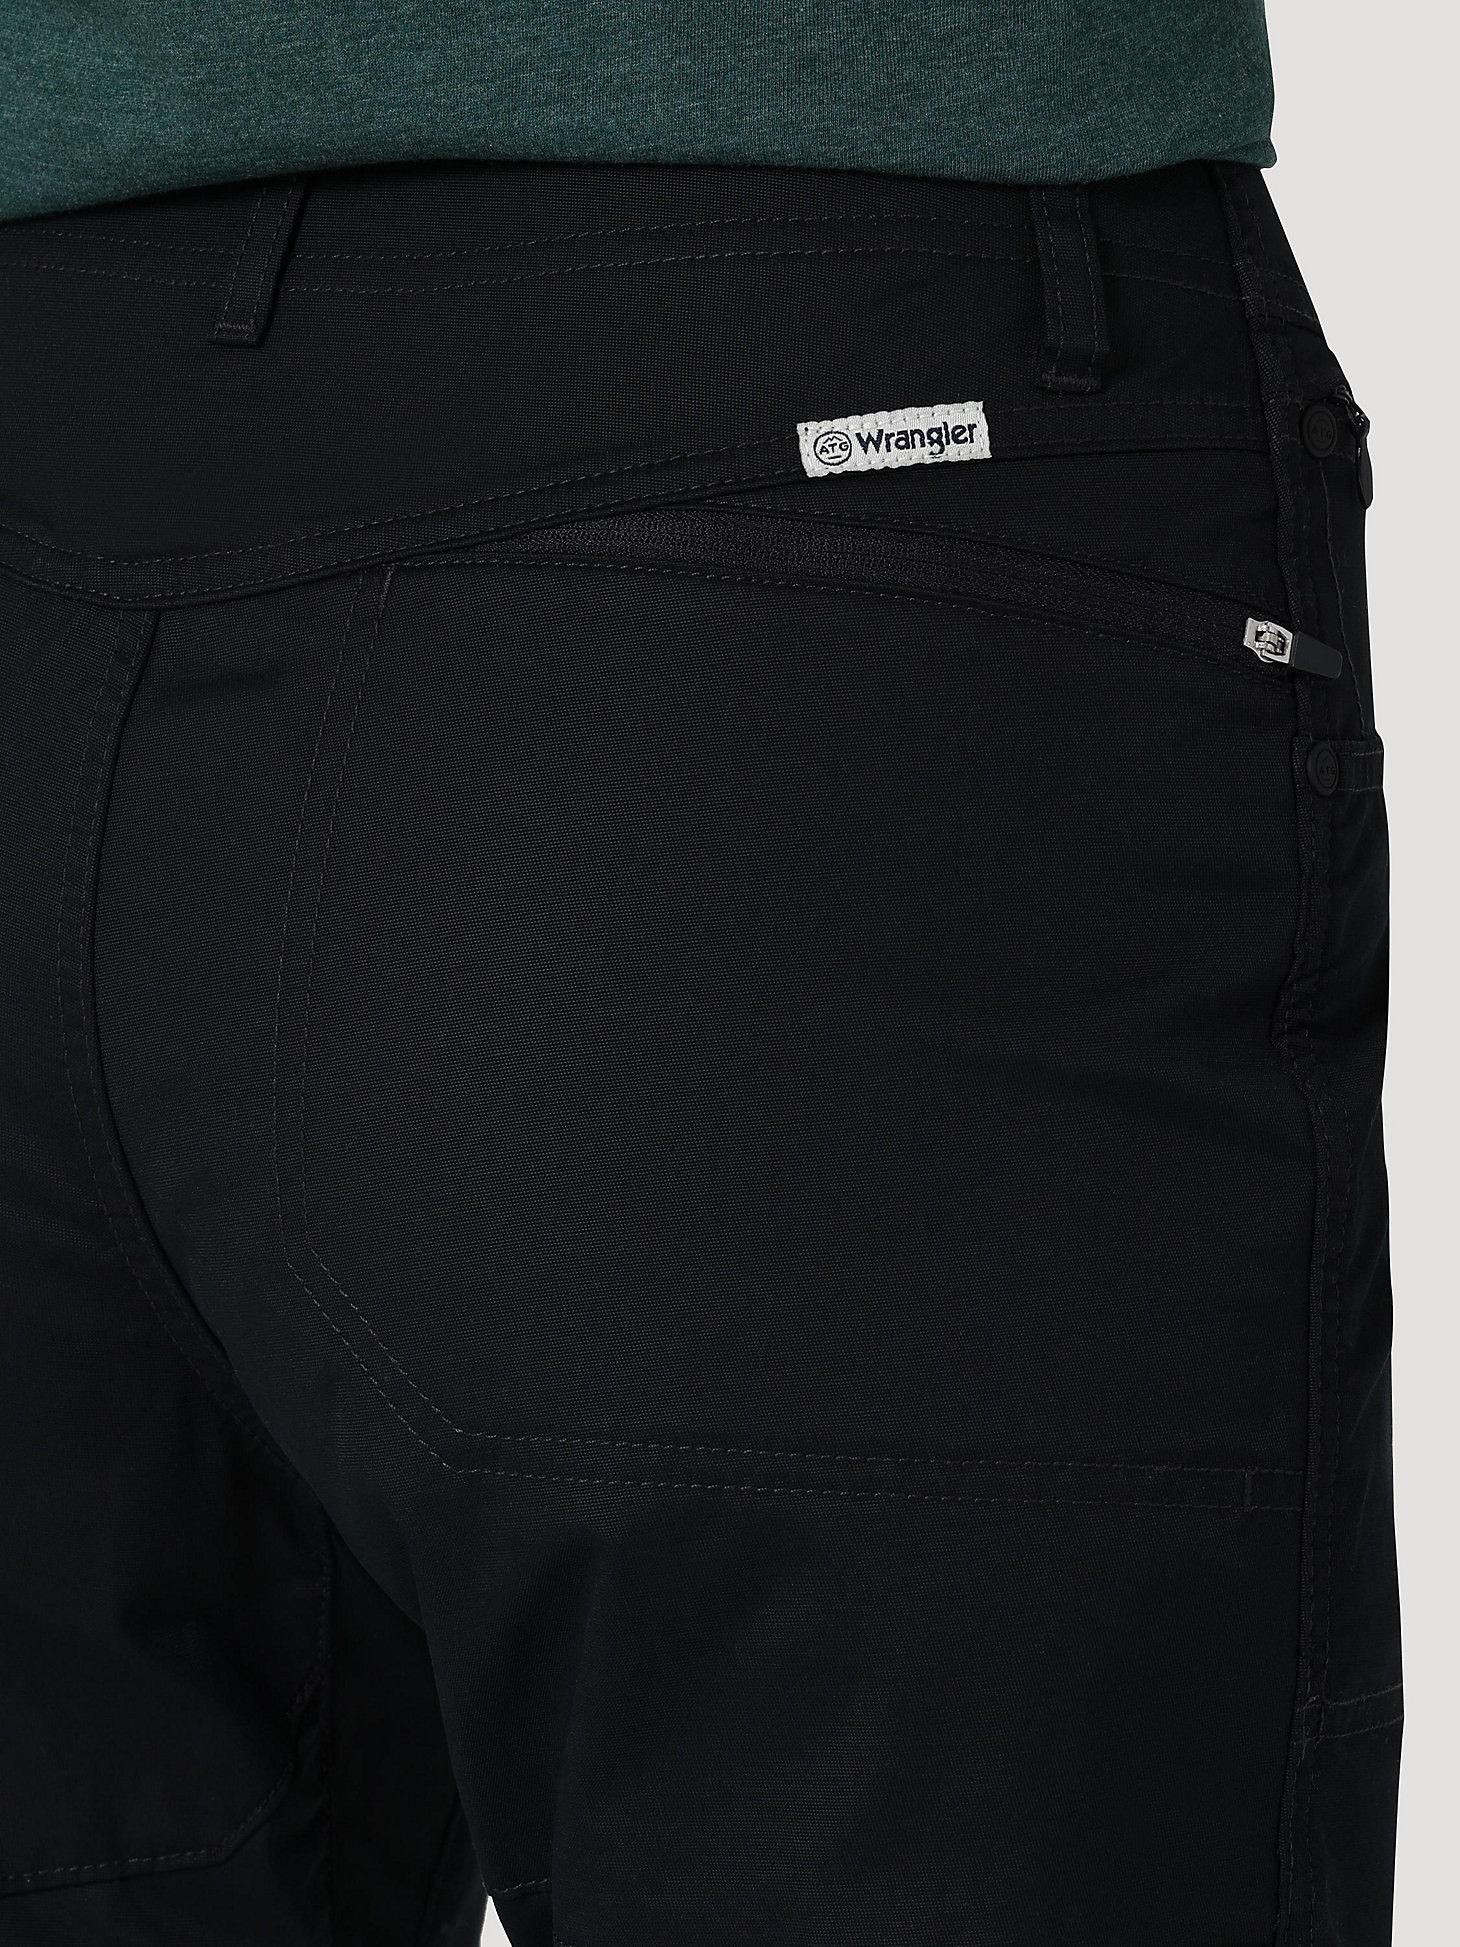 Reinforced Softshell Pant in Black alternative view 3